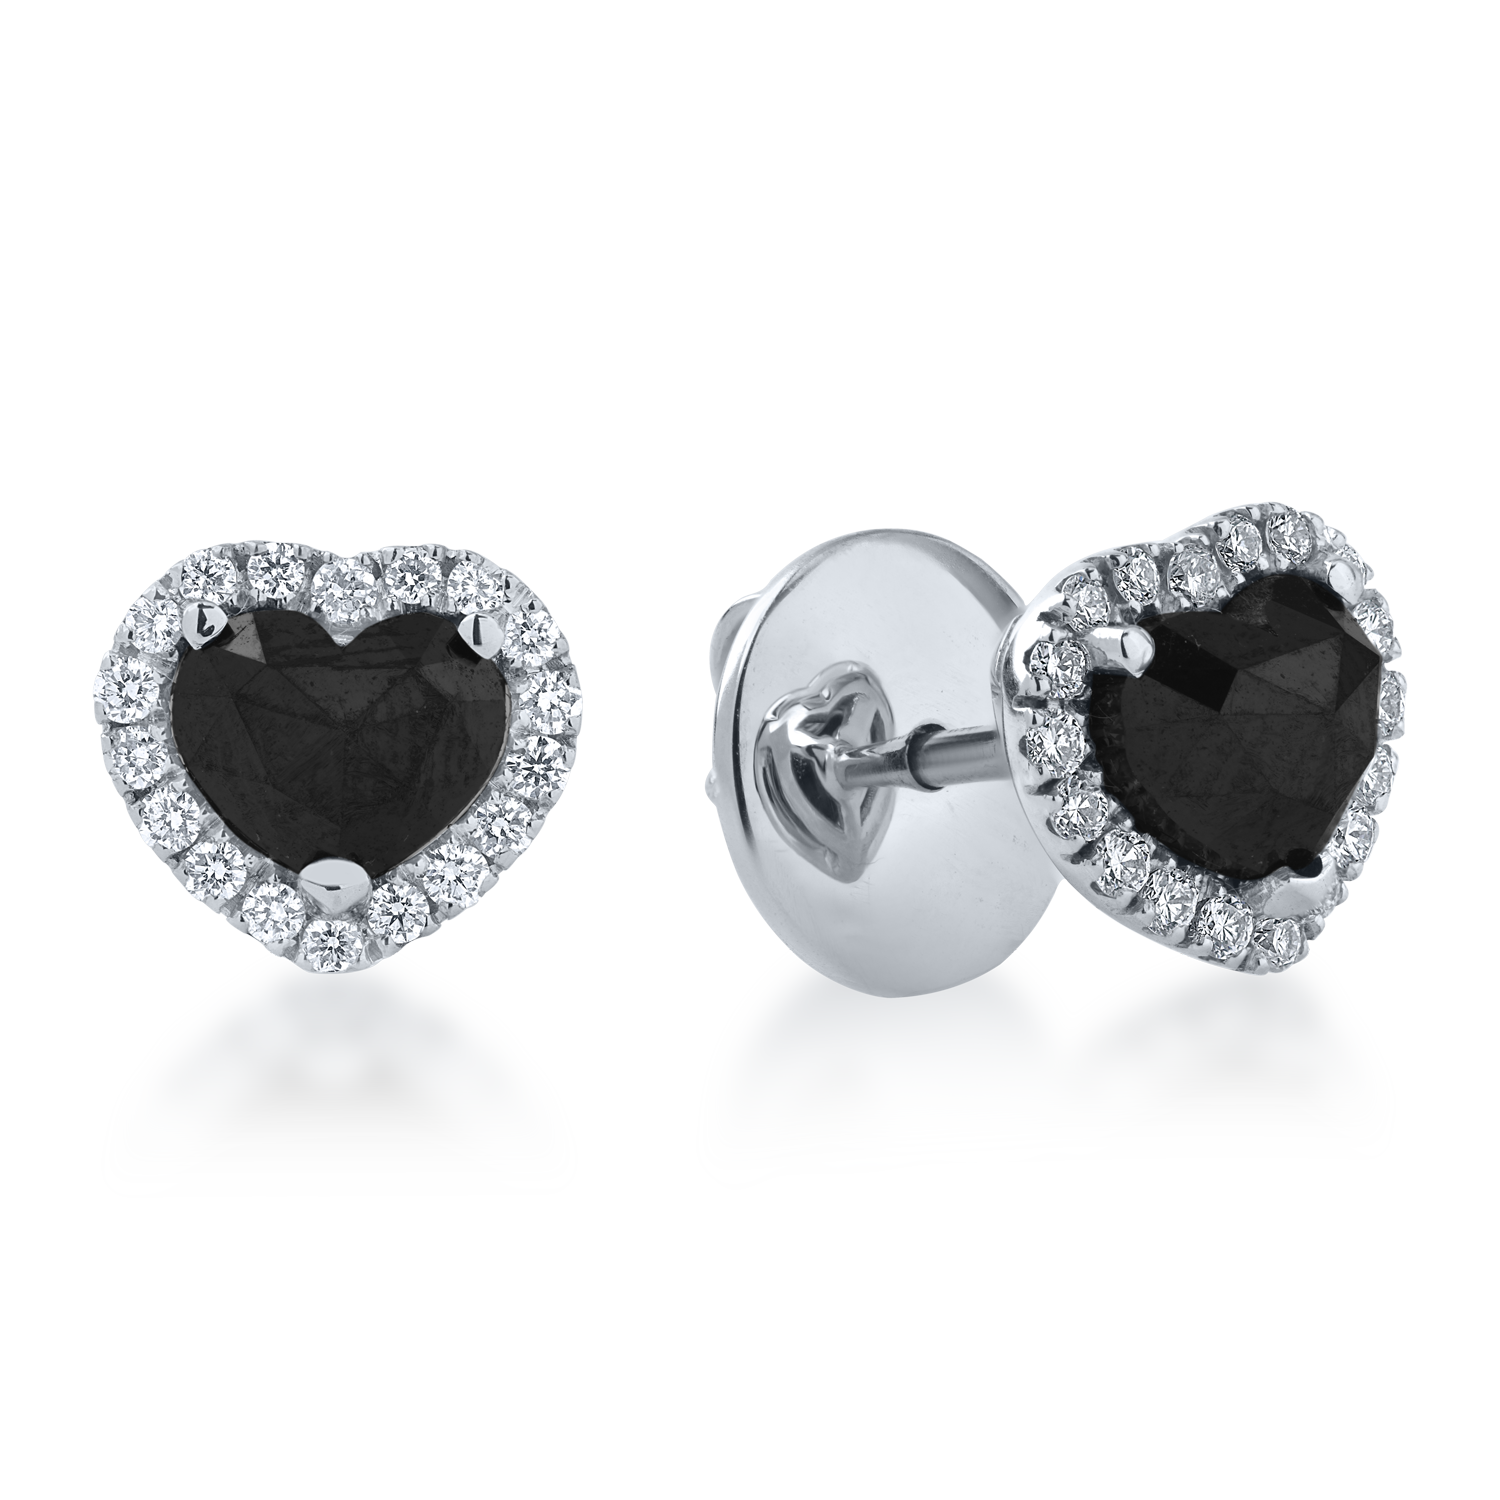 White gold heart earrings with 1.42ct black diamonds and 0.22ct clear diamonds